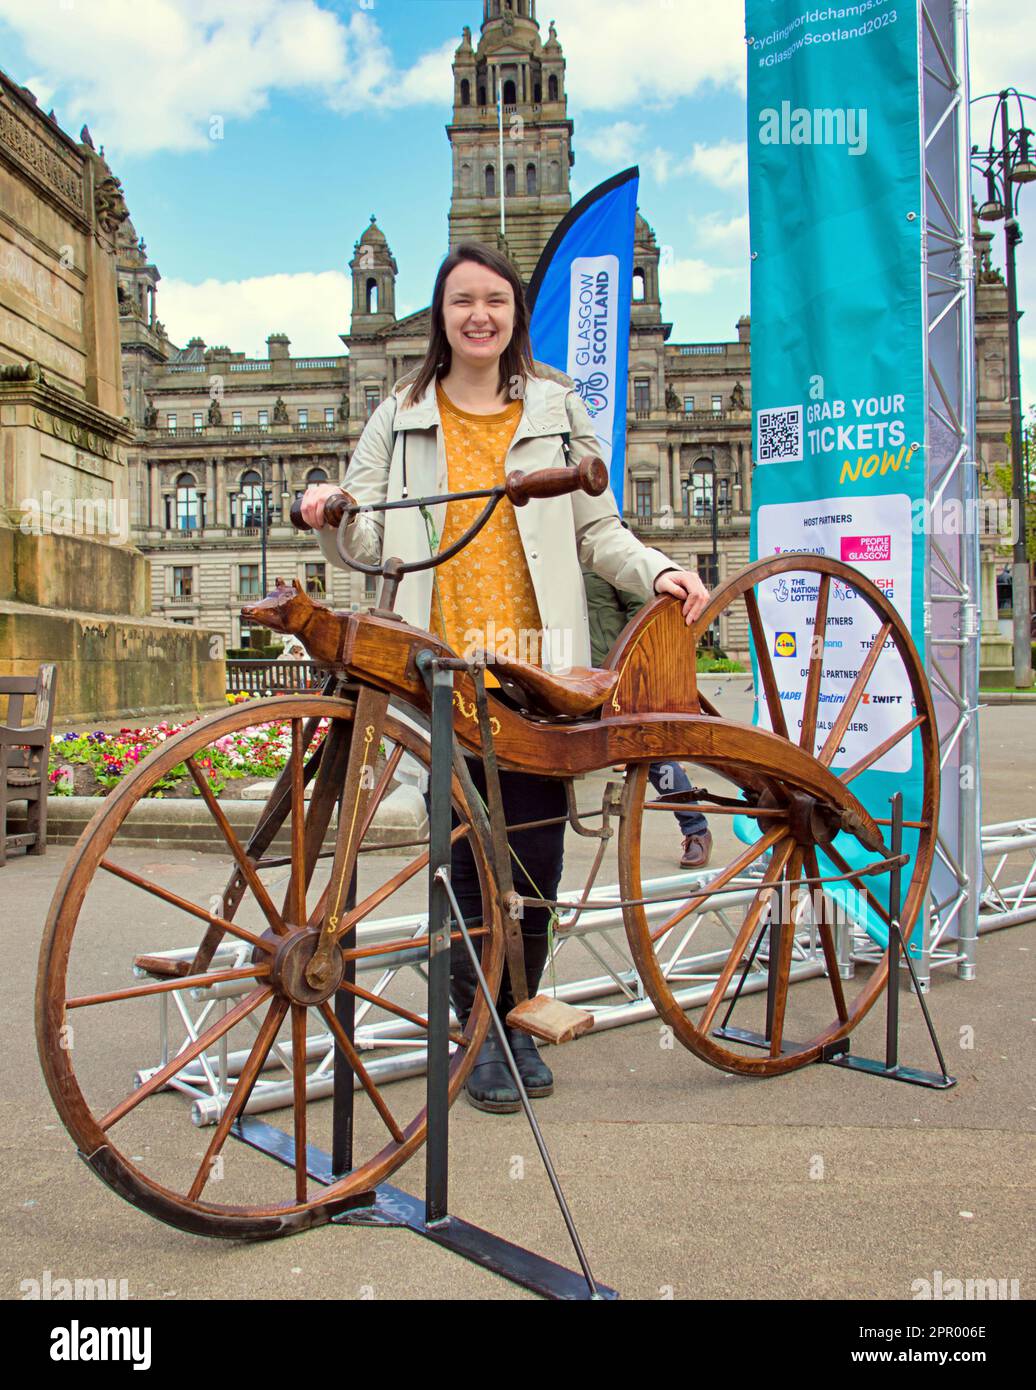 Glasgow, Scotland, UK 25th  April, 2023.  The 23 Million Mile Challenge in partnership with Love to Ride to mark 100 days to go until the inaugural cycling mega-event UCI ceremony memorial bike ride saw the commemoration of wooden bike route from Dumfries to Glasgow the first-ever bicycle ride undertaken by Scottish inventor Kirkpatrick Macmillan on the treadle bicycle in 1842.  in George square as the original journey was recreated featuring miss costello curator and a reproduction of the original bike from Dumfries museum. Credit Gerard Ferry Stock Photo